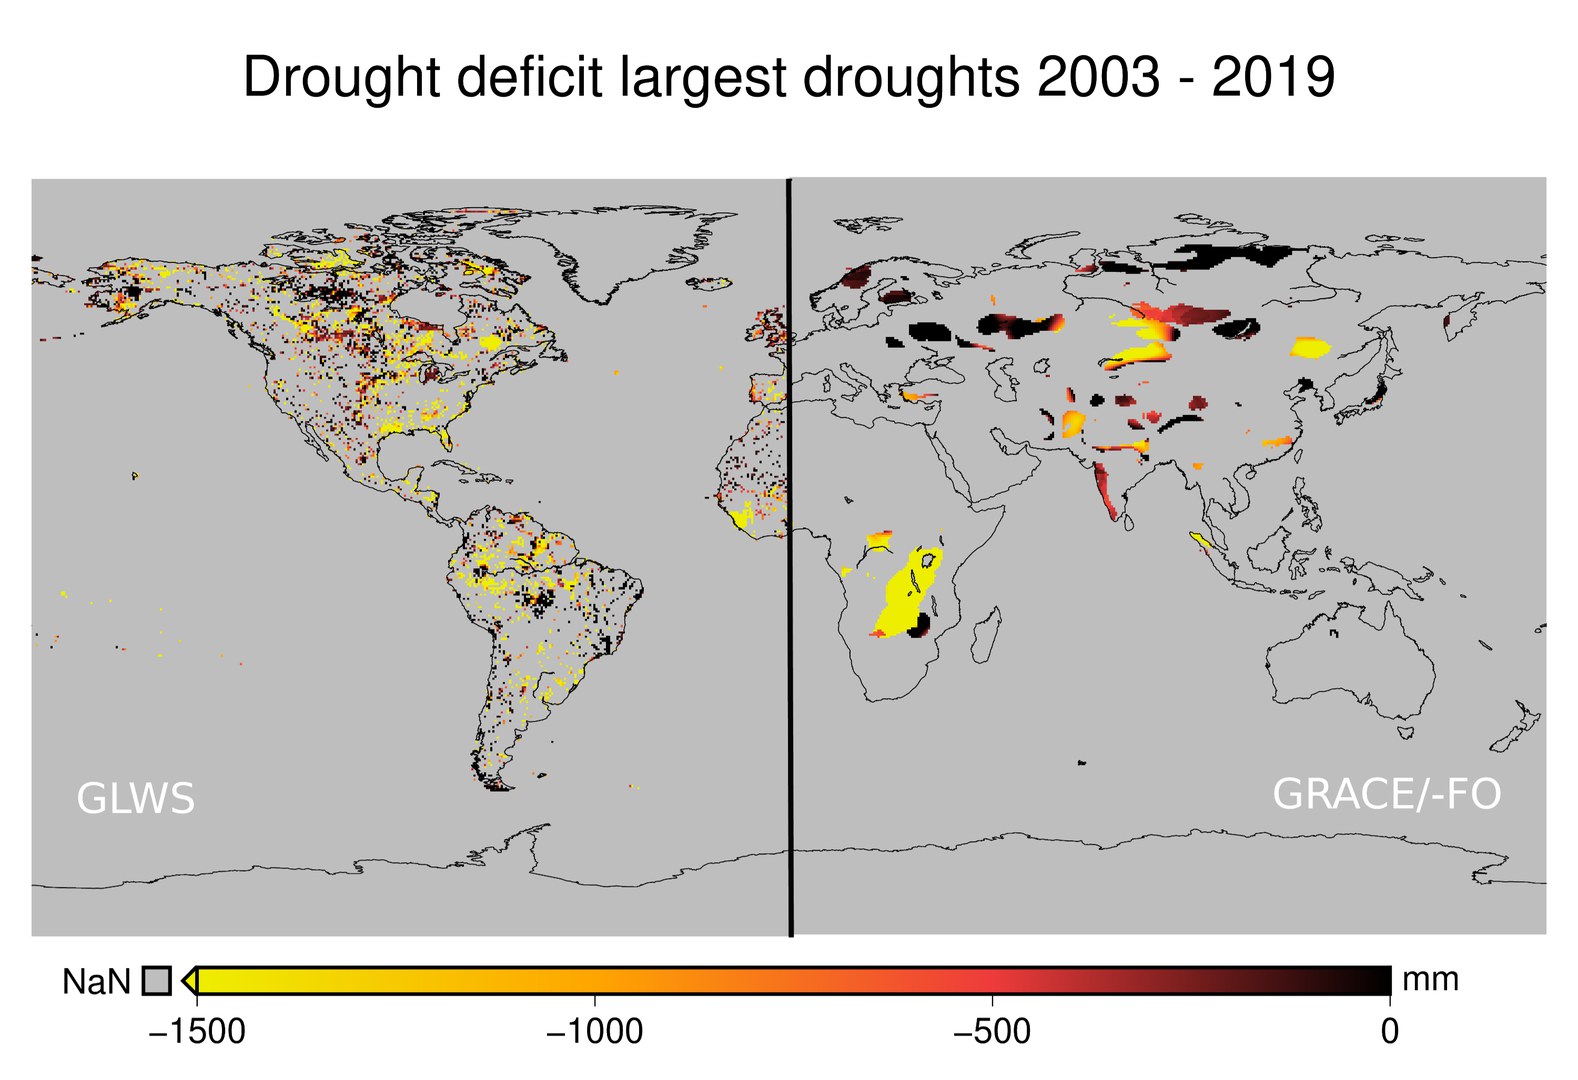 Water deficit caused by the longest droughts (at least nine months)